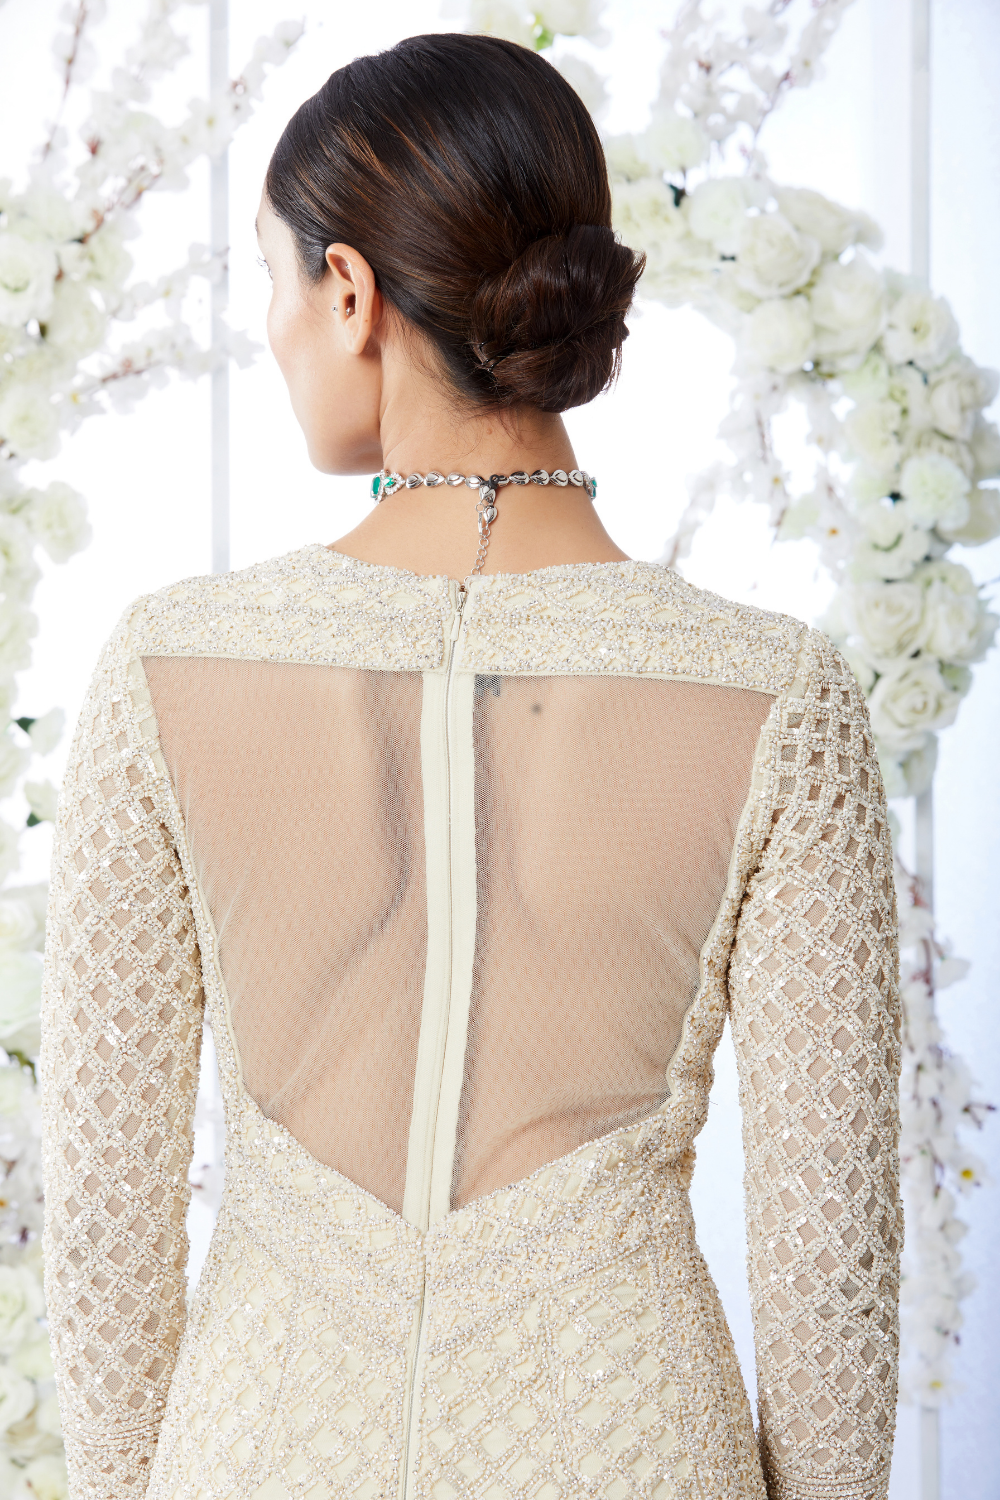 Catherine Deane brings romantic touch to wedding gowns and special  occasionoutfits - CultureMap Houston